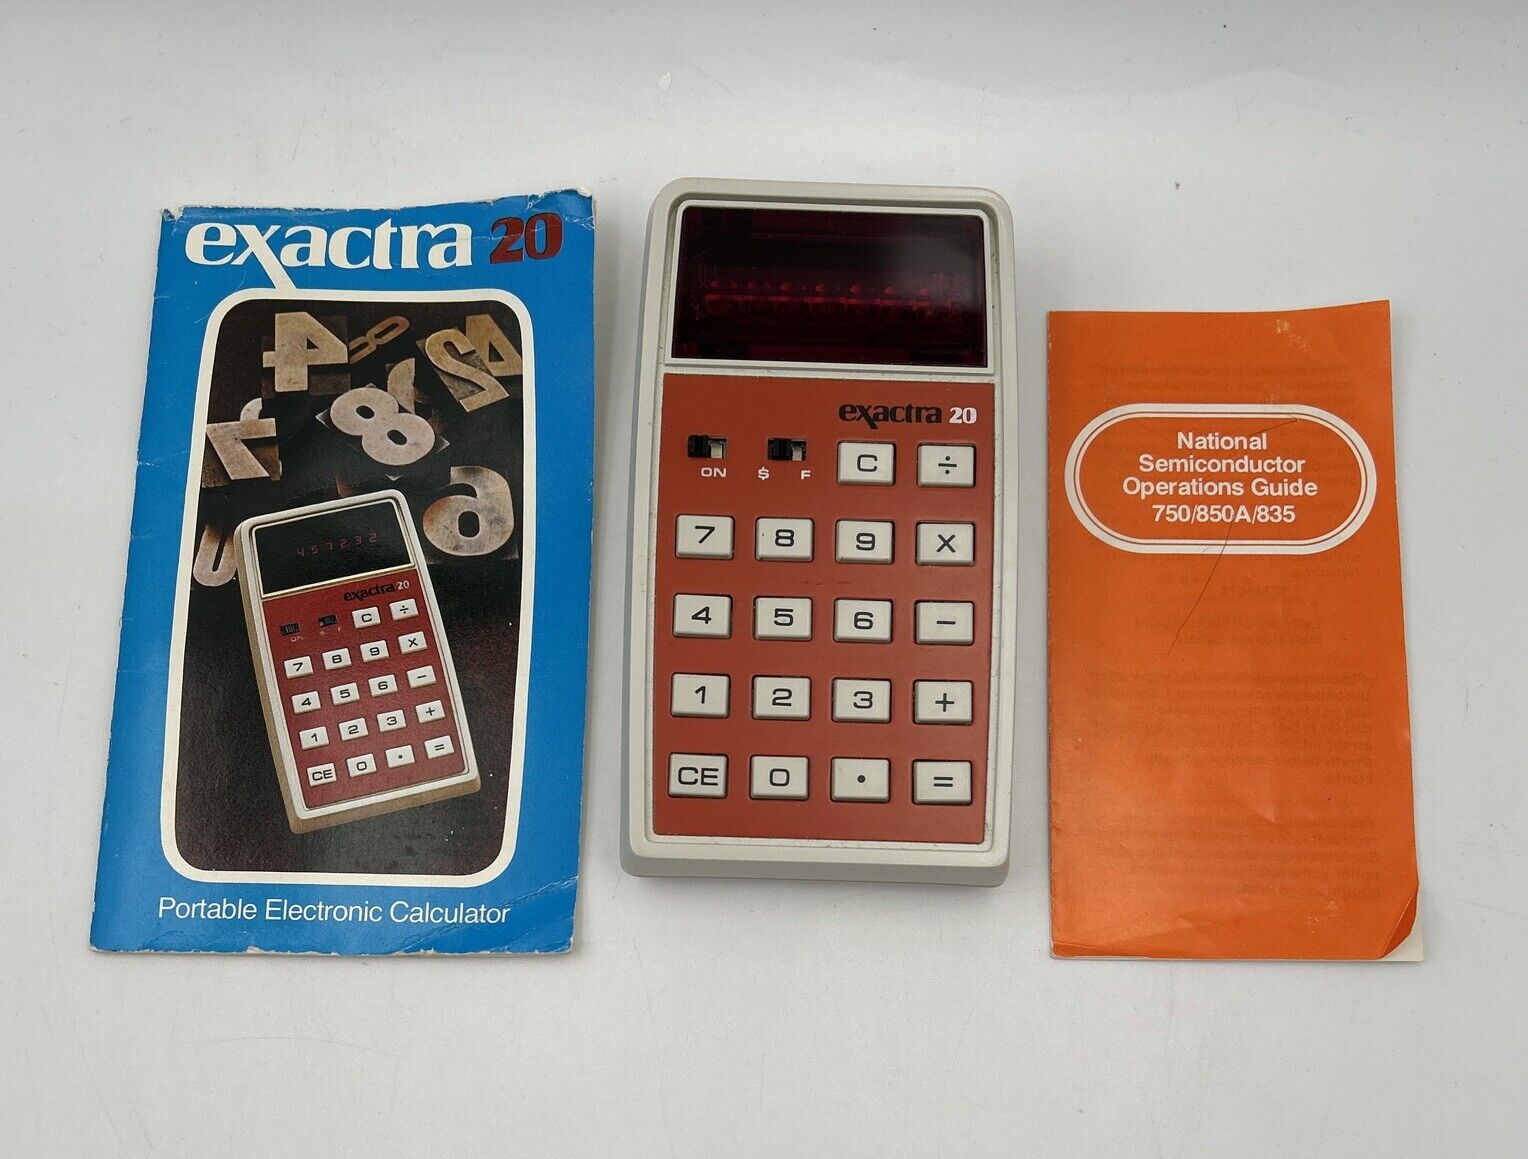 Vintage Texas Instruments Exactra 20 LED Calculator - Tested Working w/ Manuals